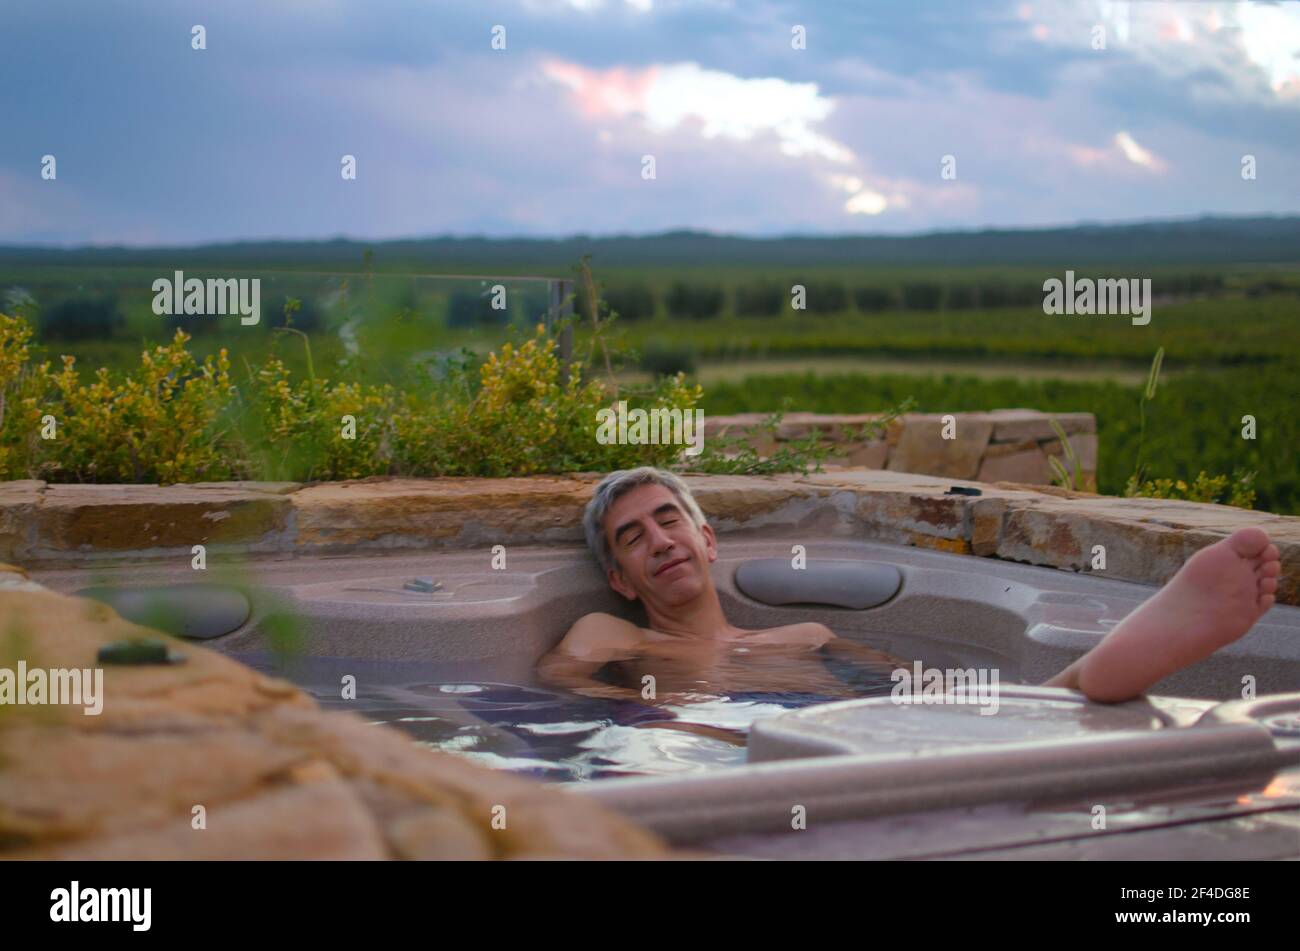 Smiling man relaxing in an outdoor jacuzzi in a garden, Argentina Stock Photo